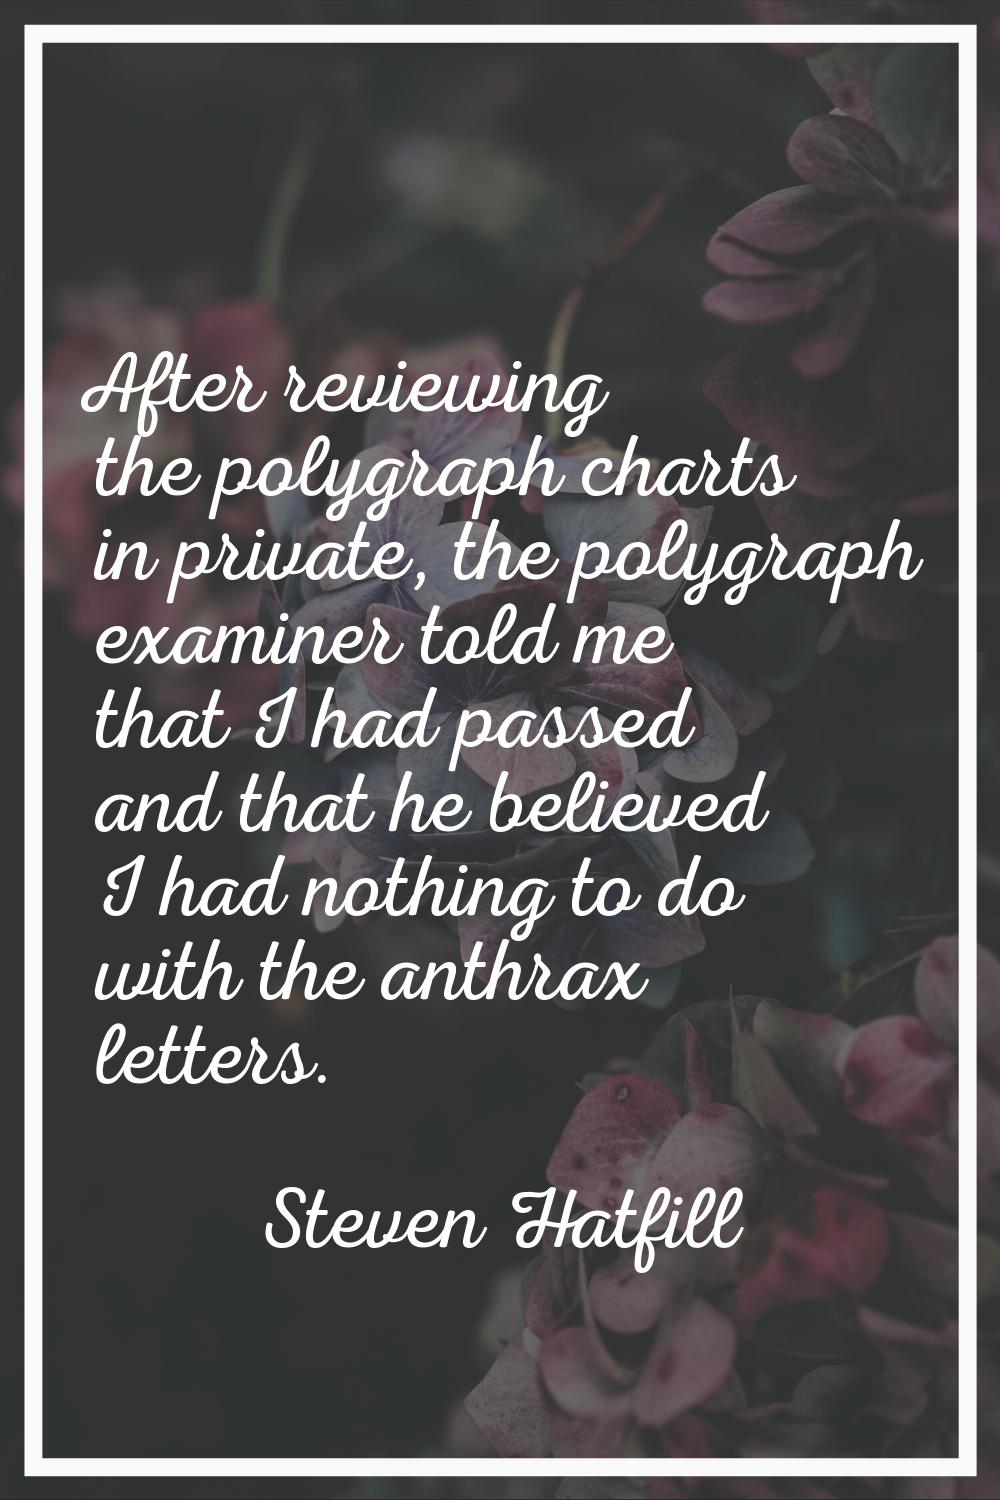 After reviewing the polygraph charts in private, the polygraph examiner told me that I had passed a